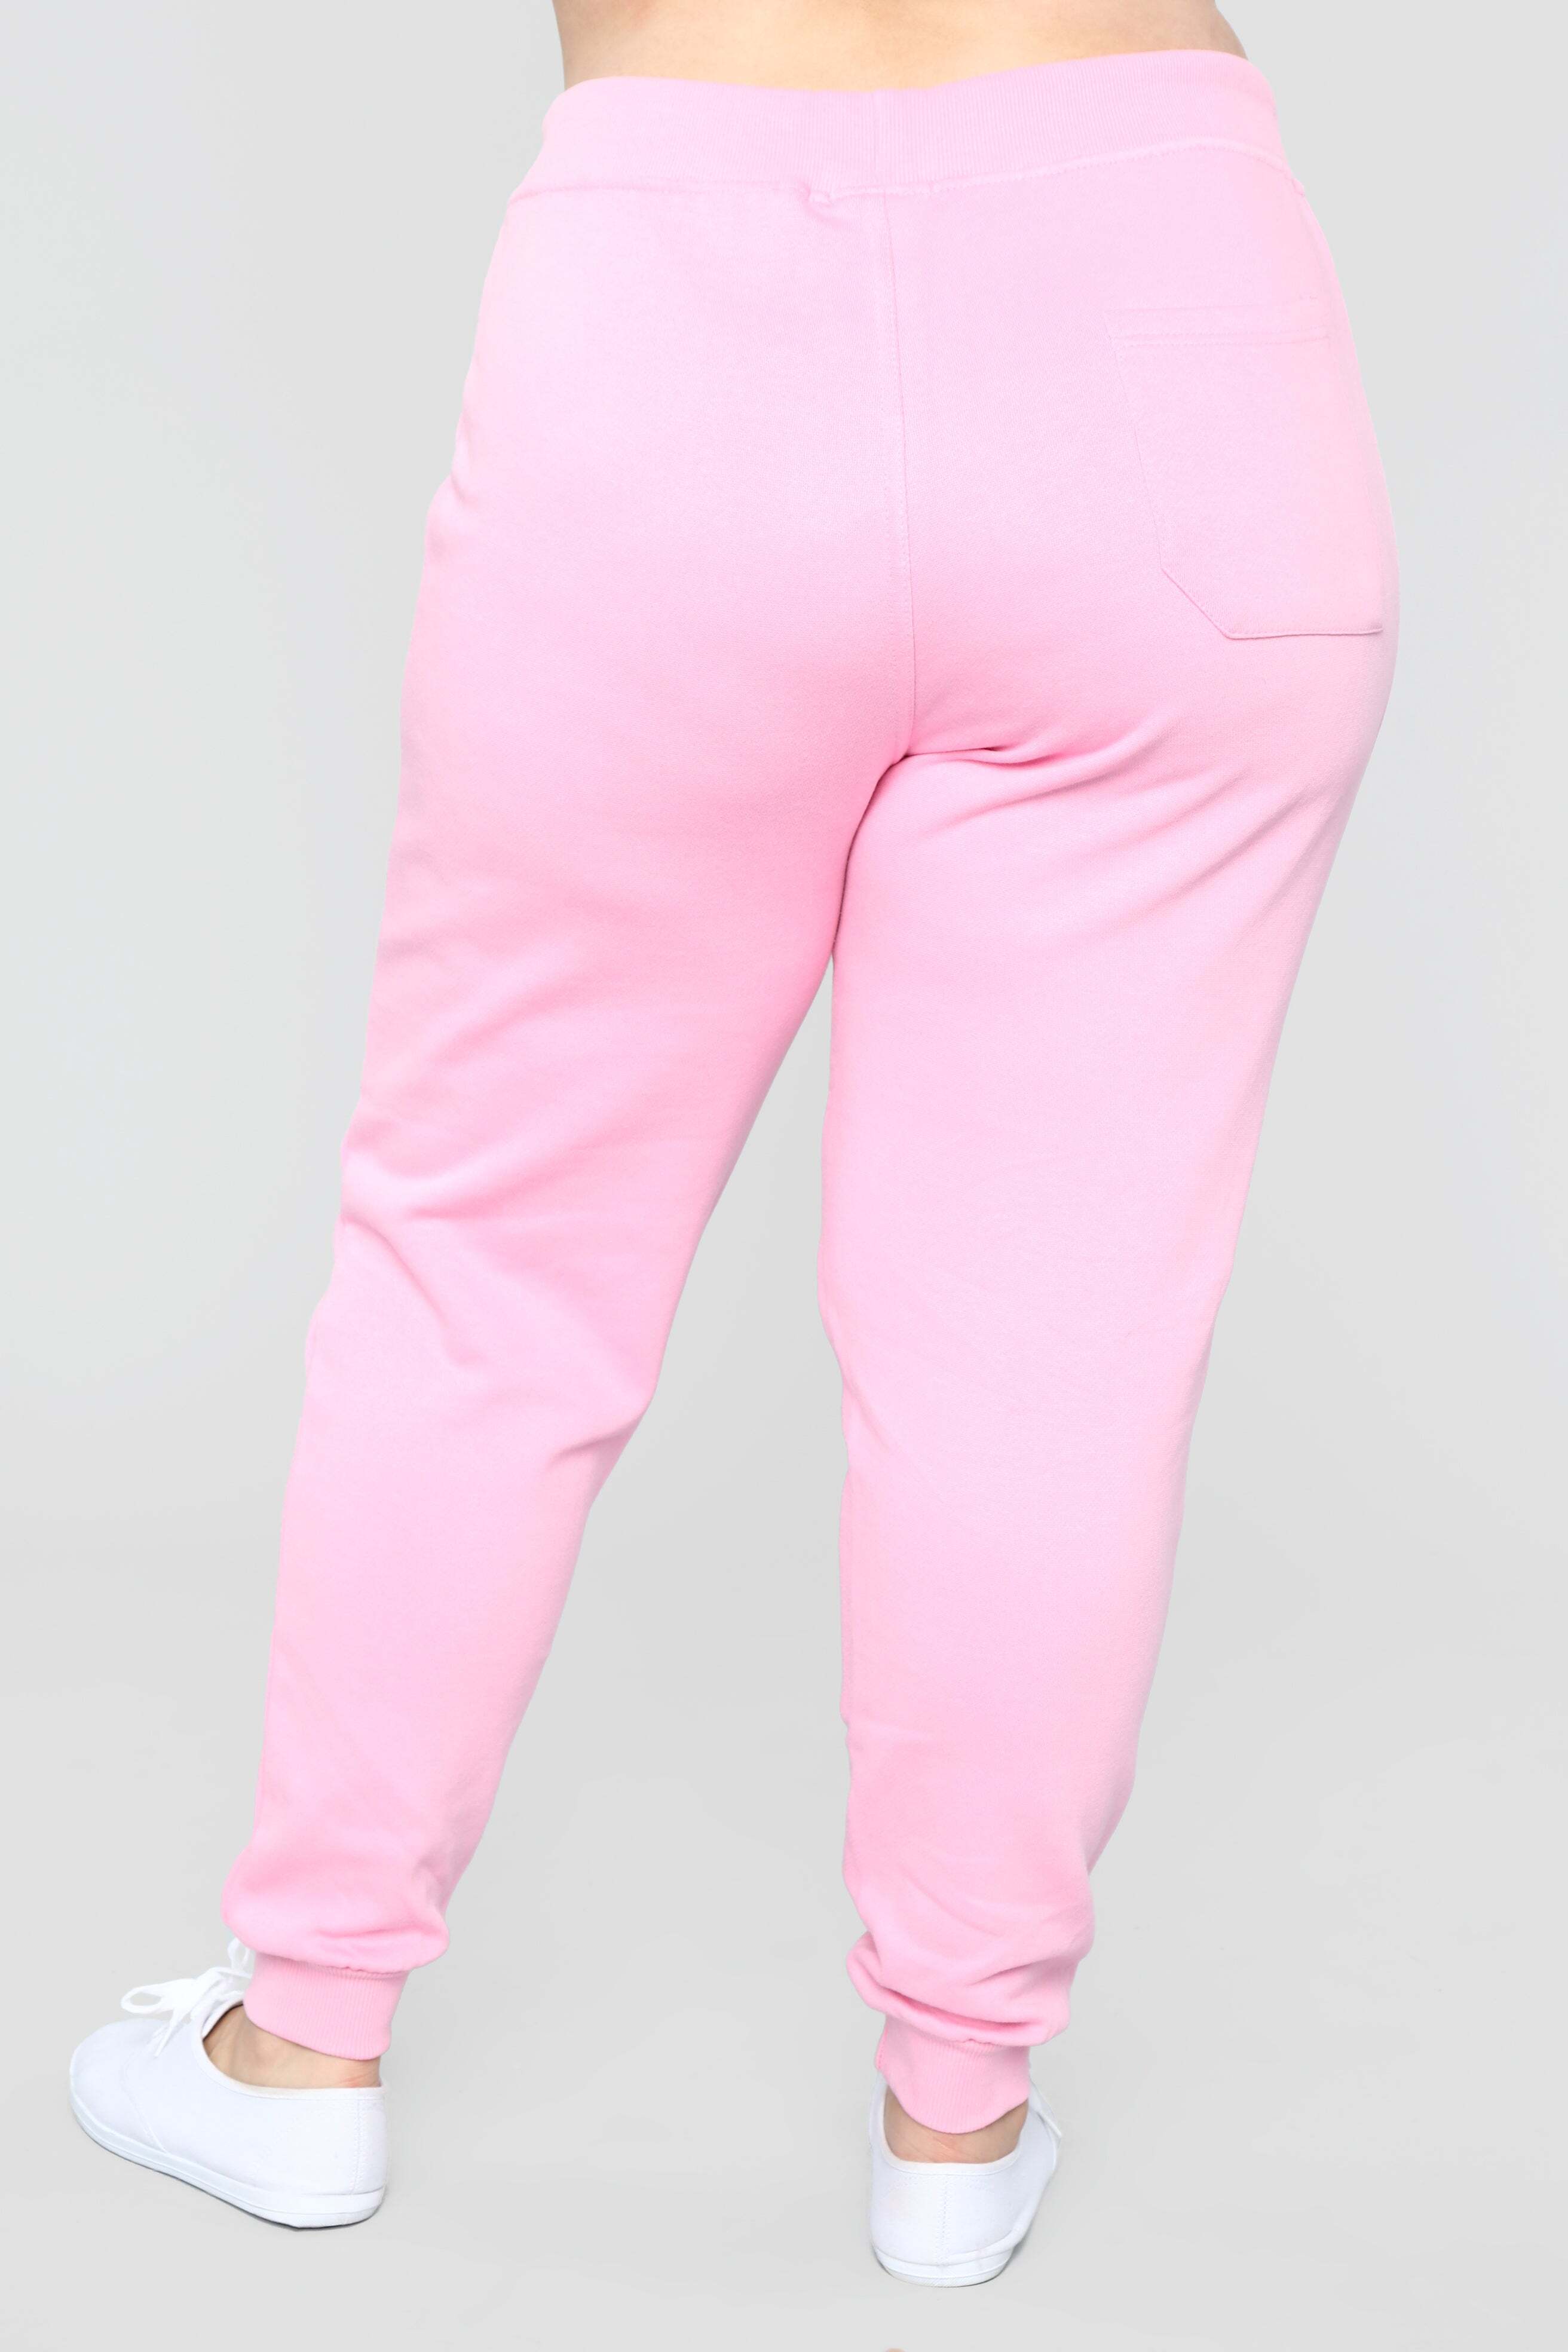 Stole Your Boyfriend's Oversized Jogger - Pink - hattoul